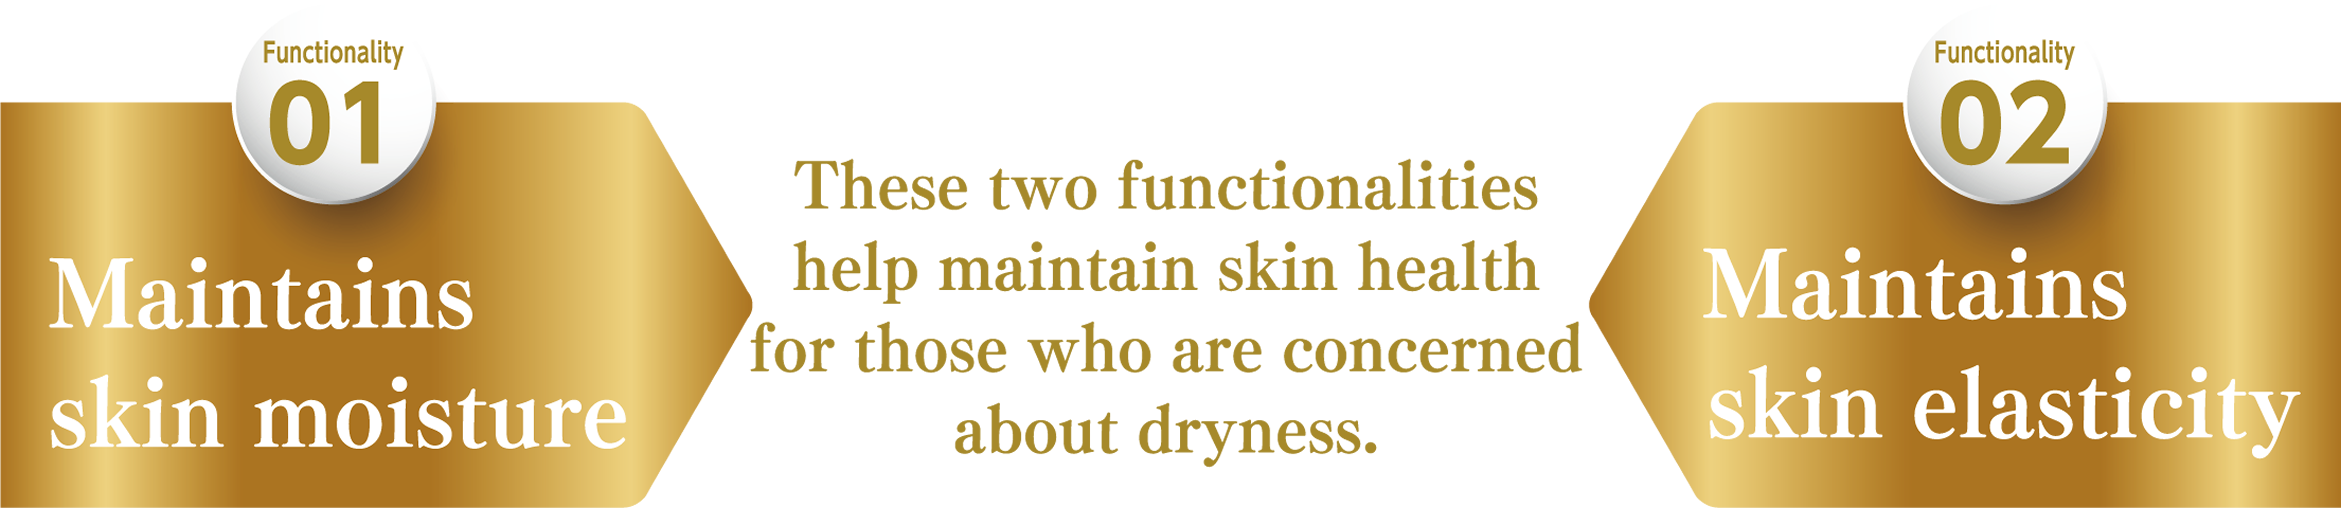 These two functionalities help maintain skin health for those who are concerned about dryness.